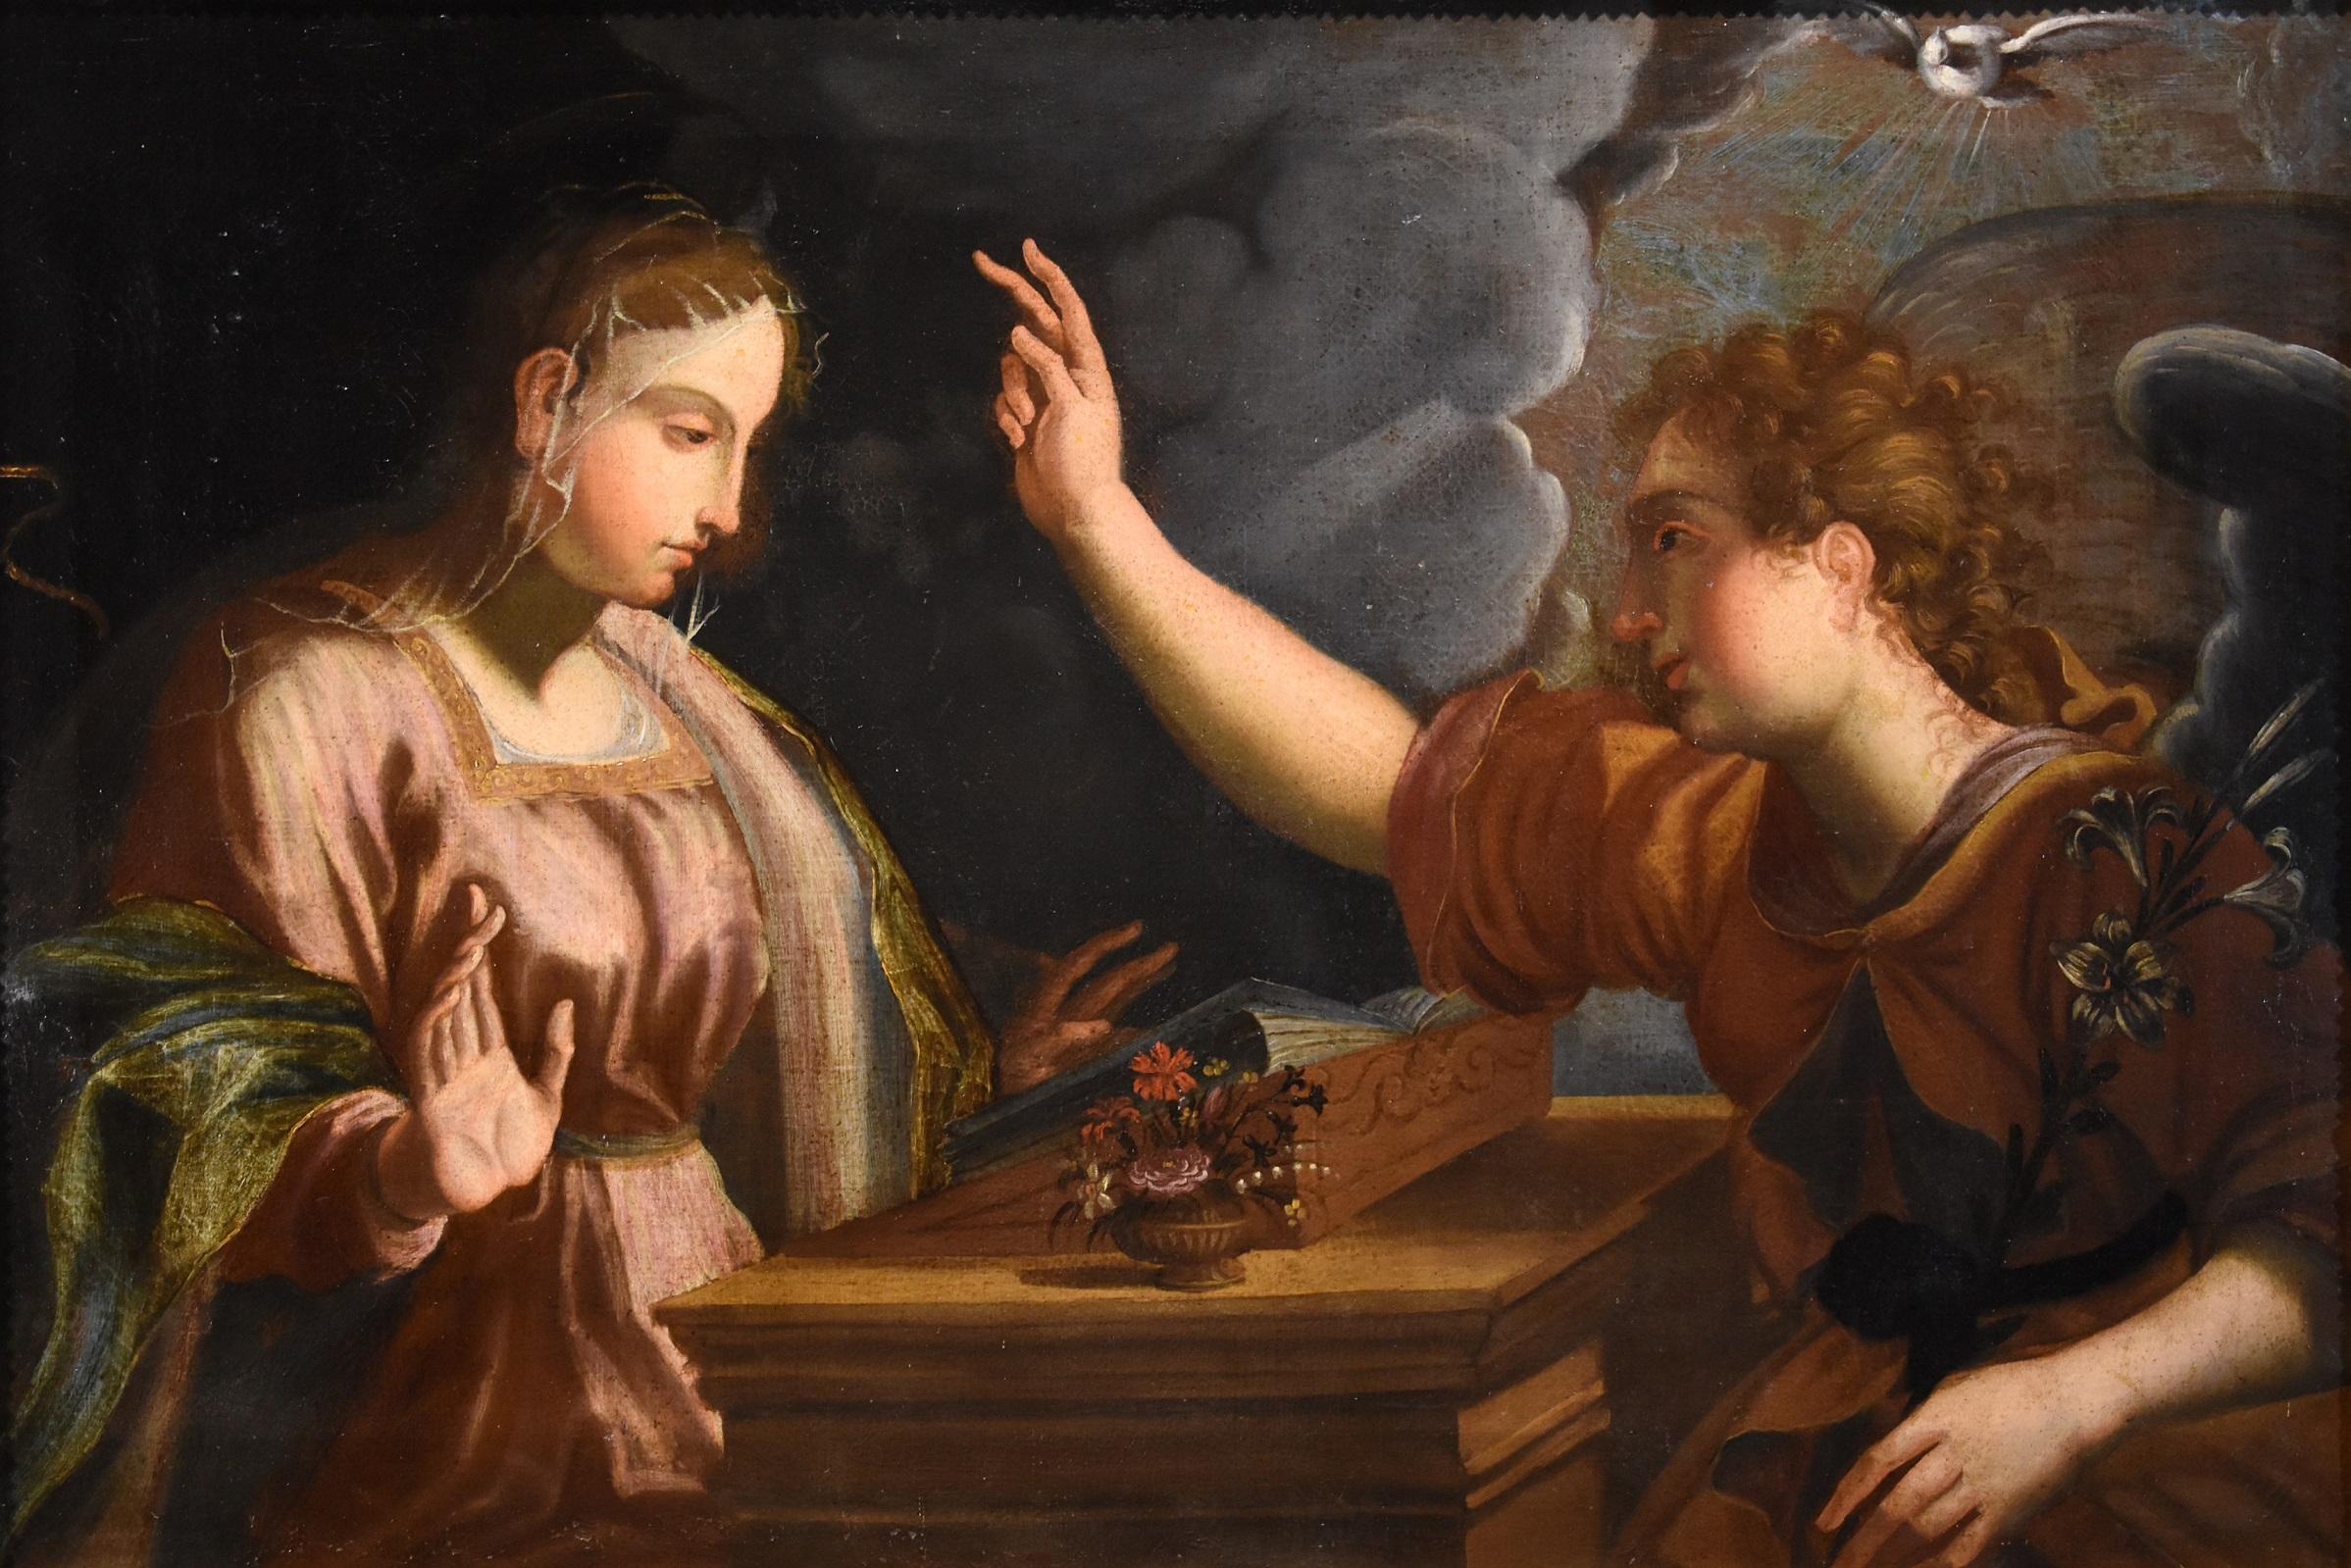 Annunciation De Witte Paint Oil on canvas Old master 17th Century Flemish Art  - Painting by Pieter de Witte, also known as Peter Candid (Bruges, 1548 - Munich, 1628)